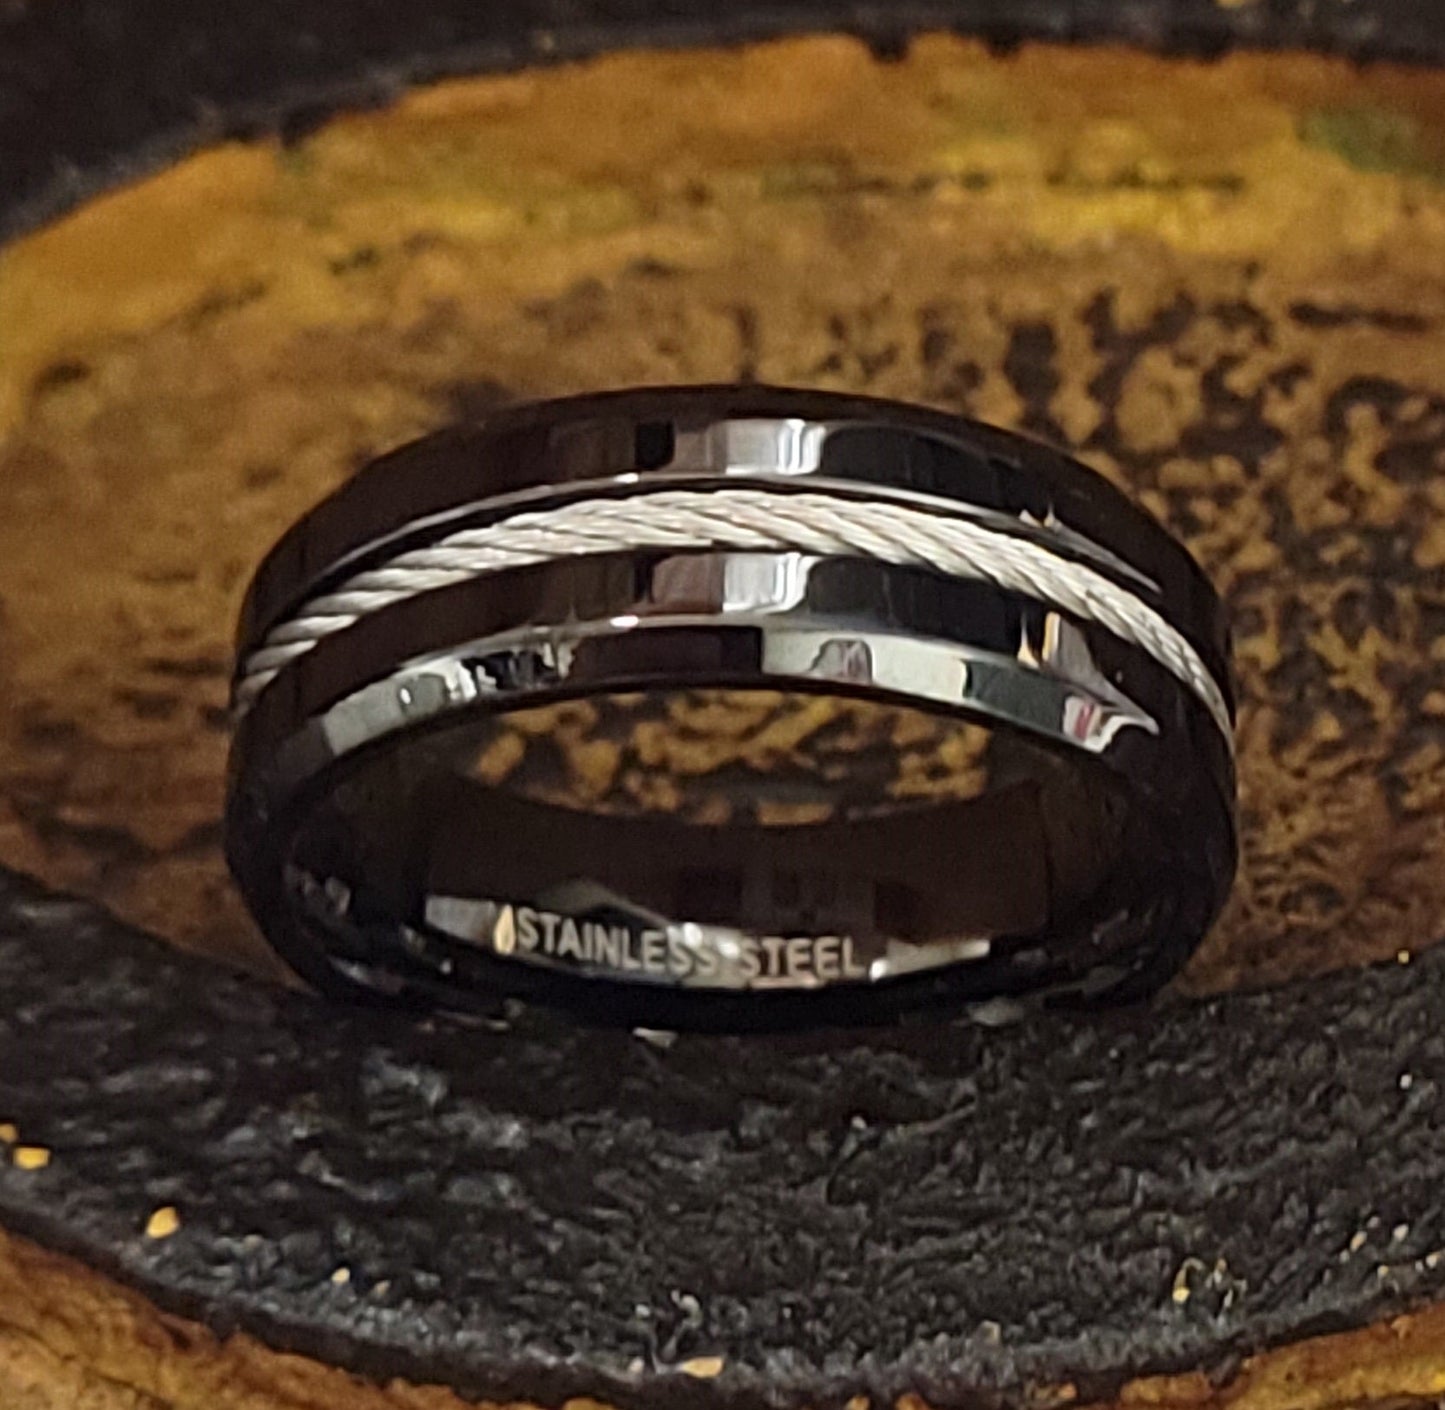 ThinkEngraved Engraved Ring Personalized Engraved Wire Cable Wedding Ring For Men - Handwriting Ring